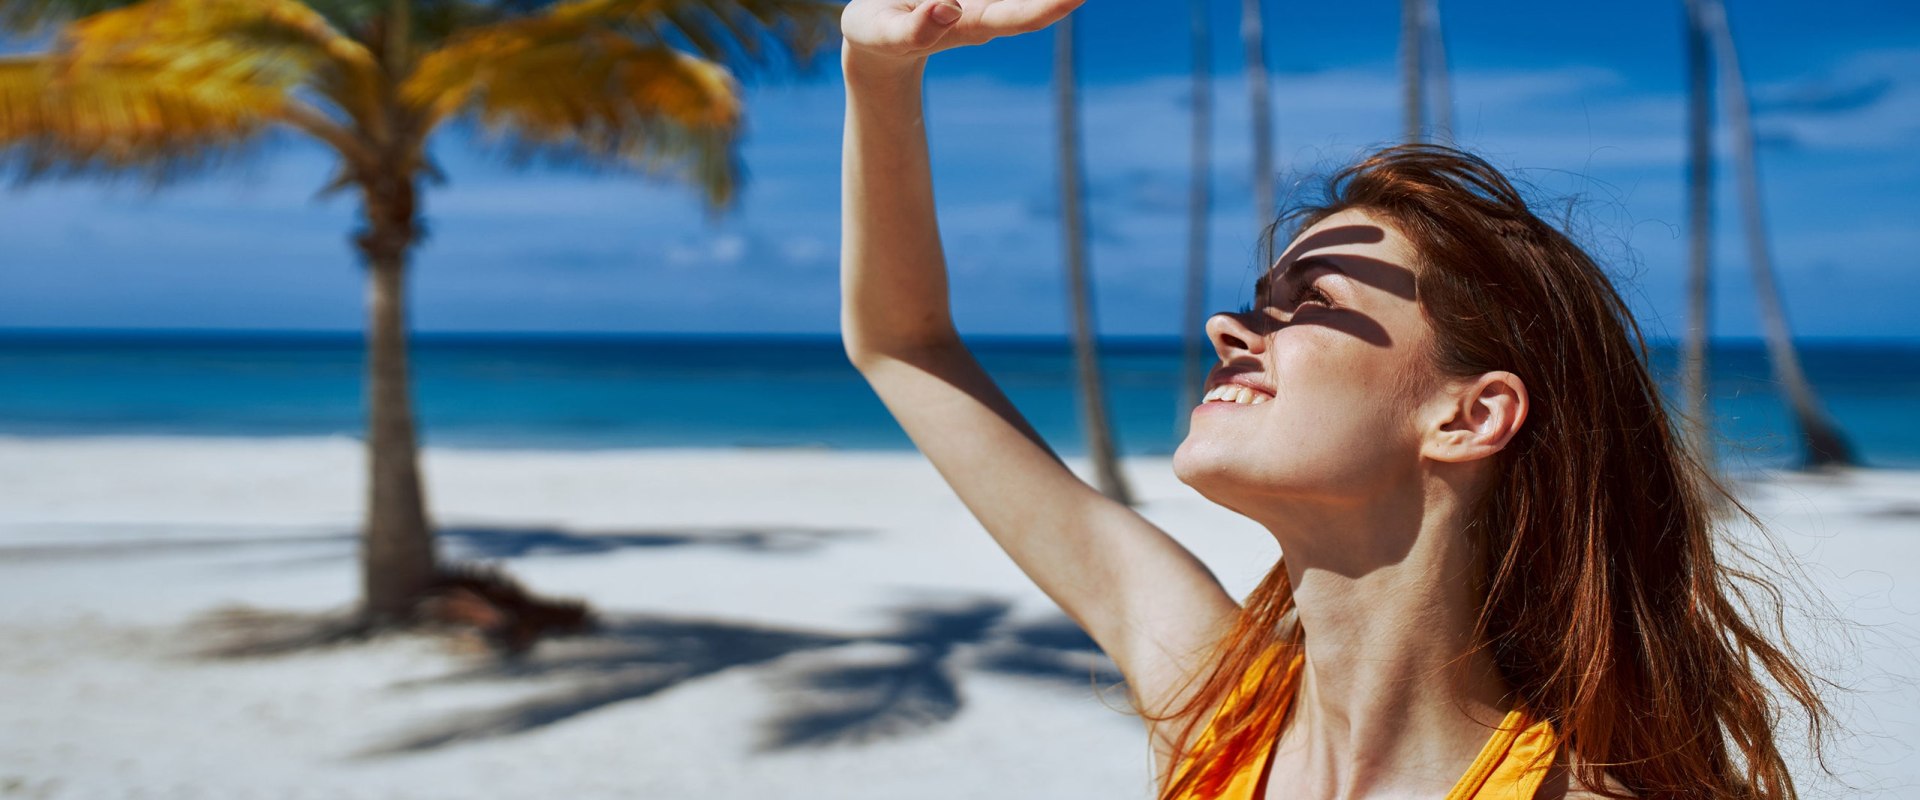 What are the best beauty and health tips for avoiding sun damage?